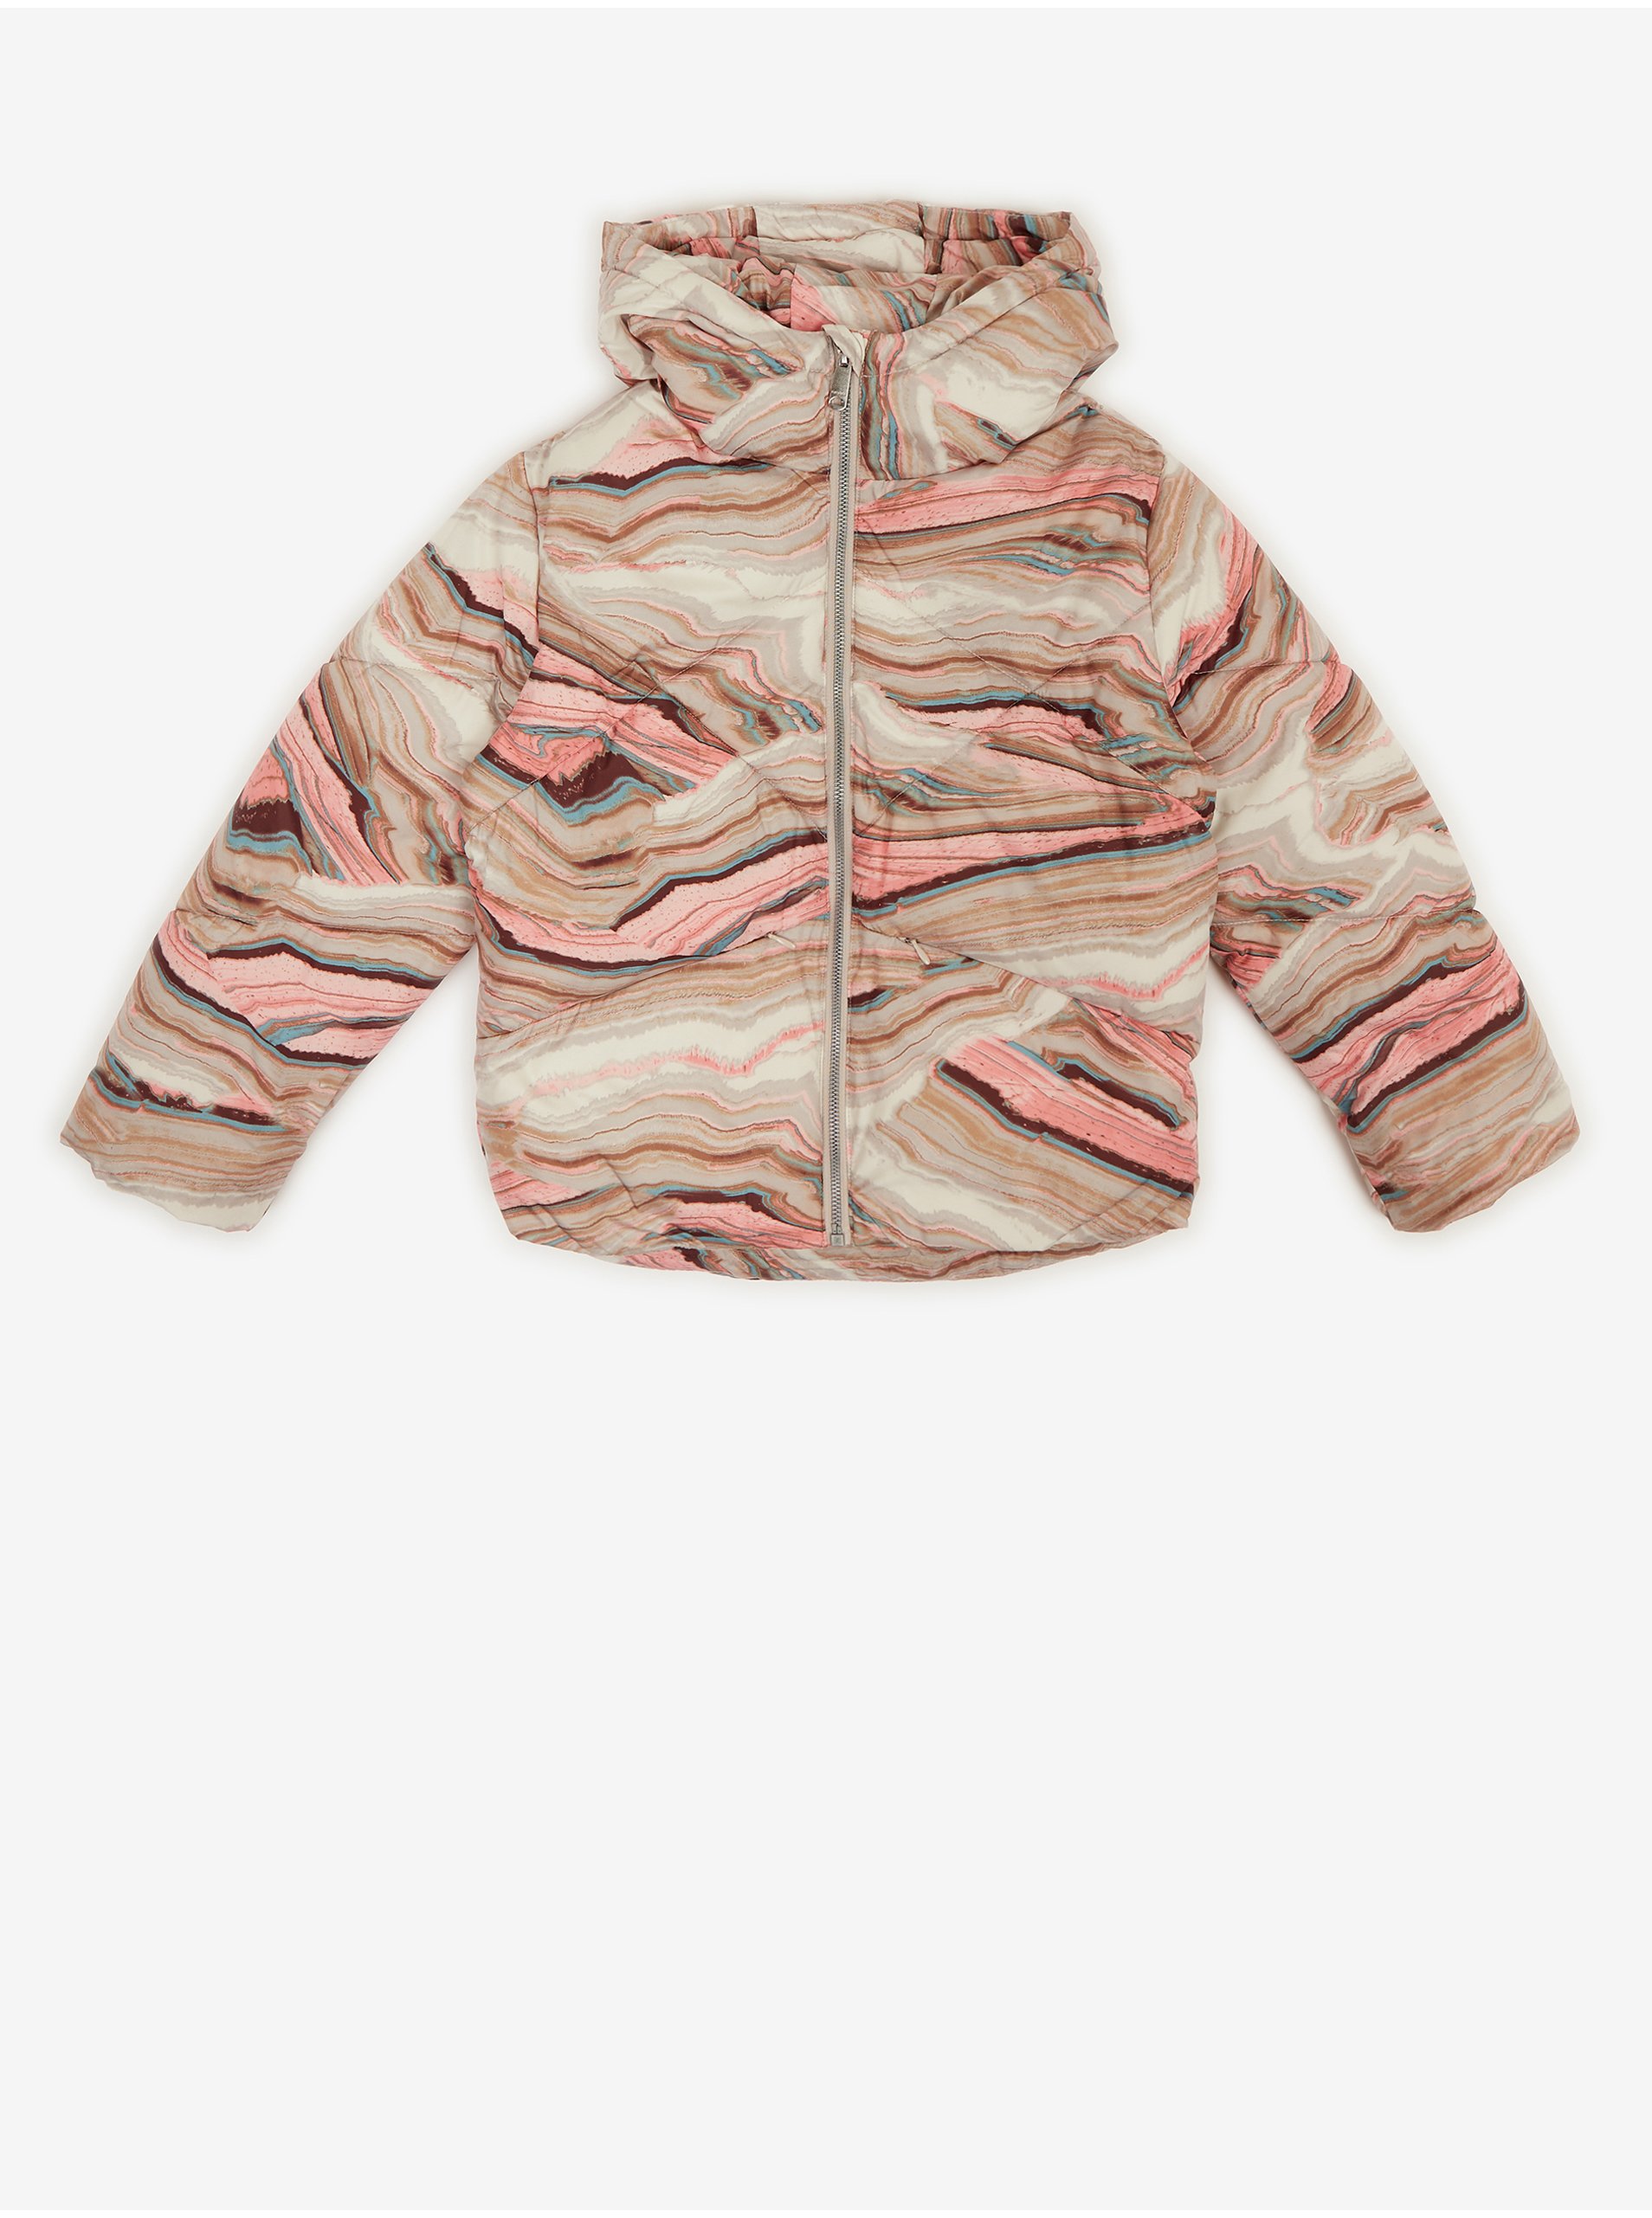 Pink-Beige Girly Patterned Quilted Jacket Tom Tailor - Girls